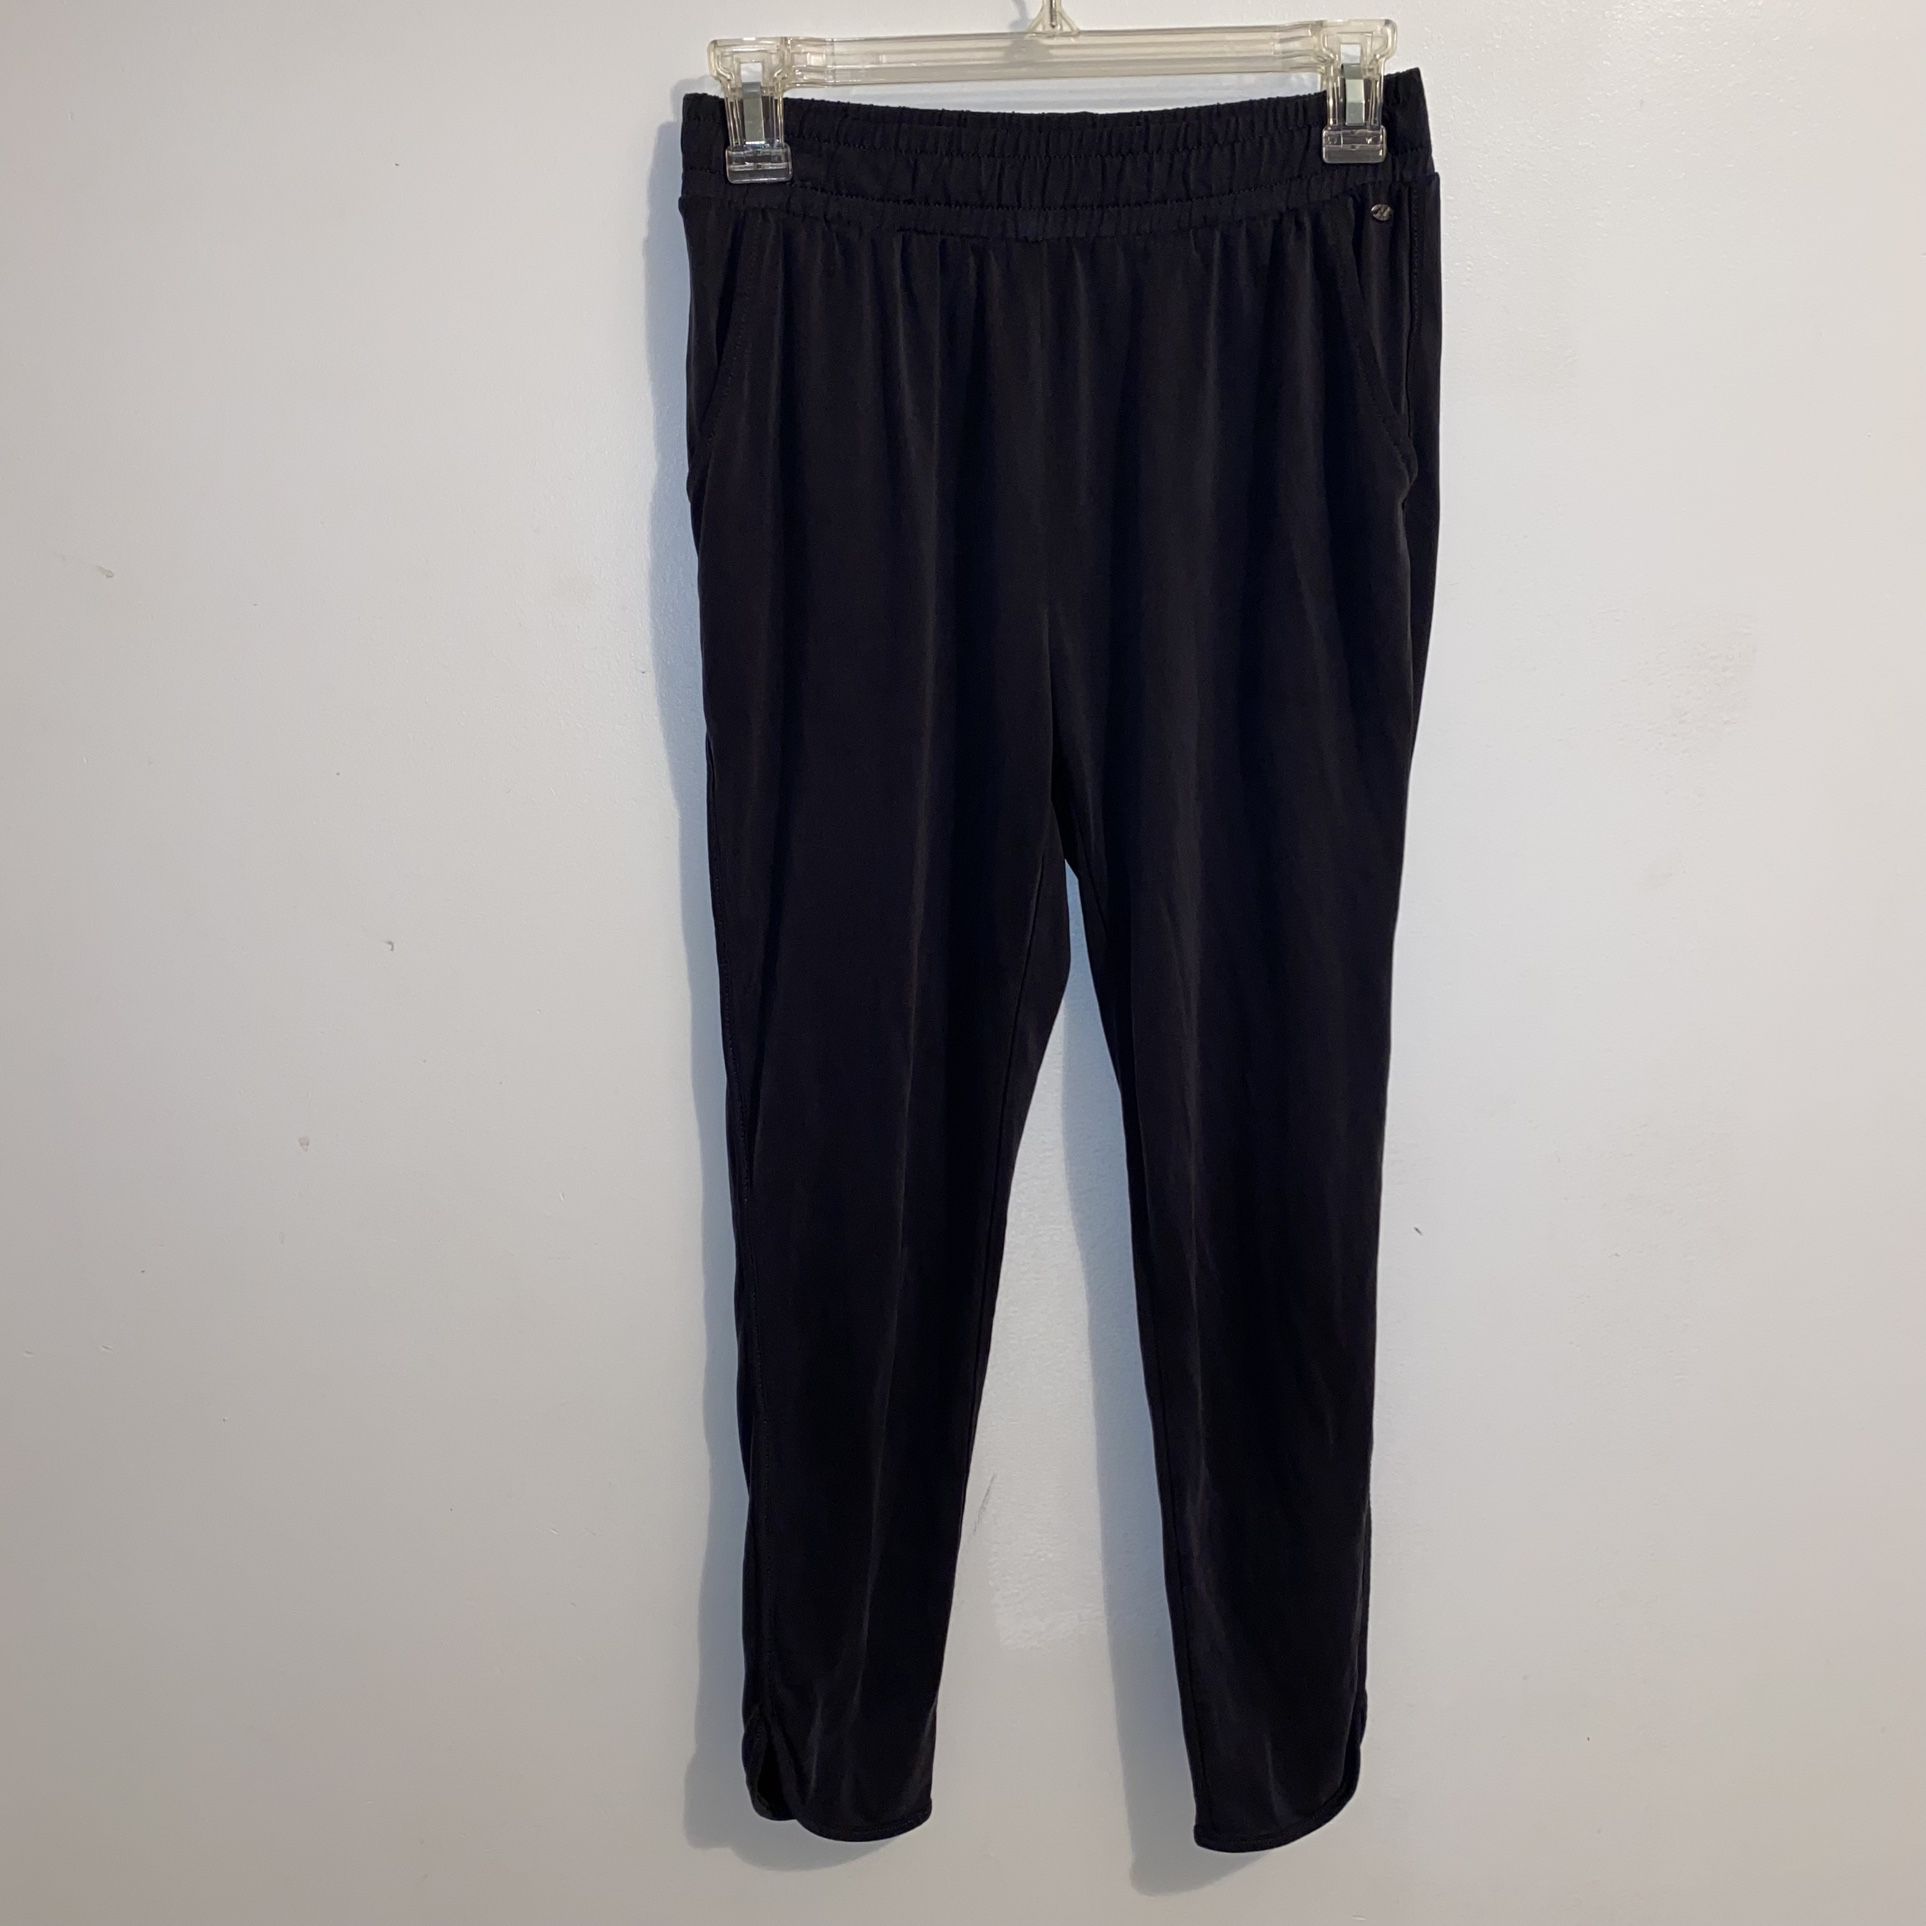 $49 PRE OWNED American Eagle Outfitters Black Pull On Joggers w/ Pockets XS